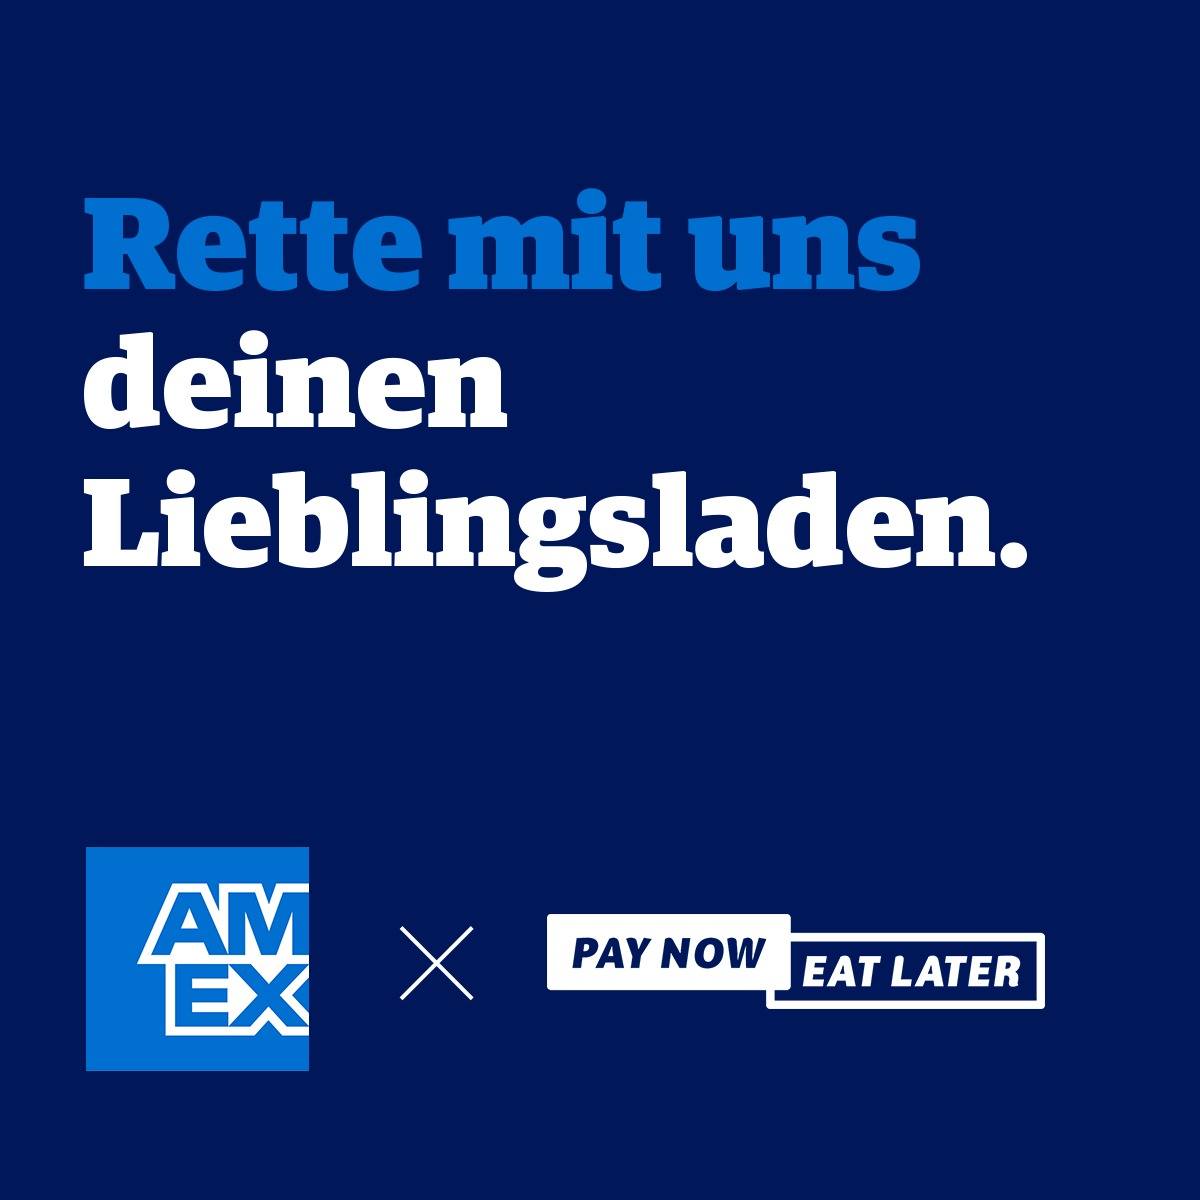 Amex Pay Now, Eat Later